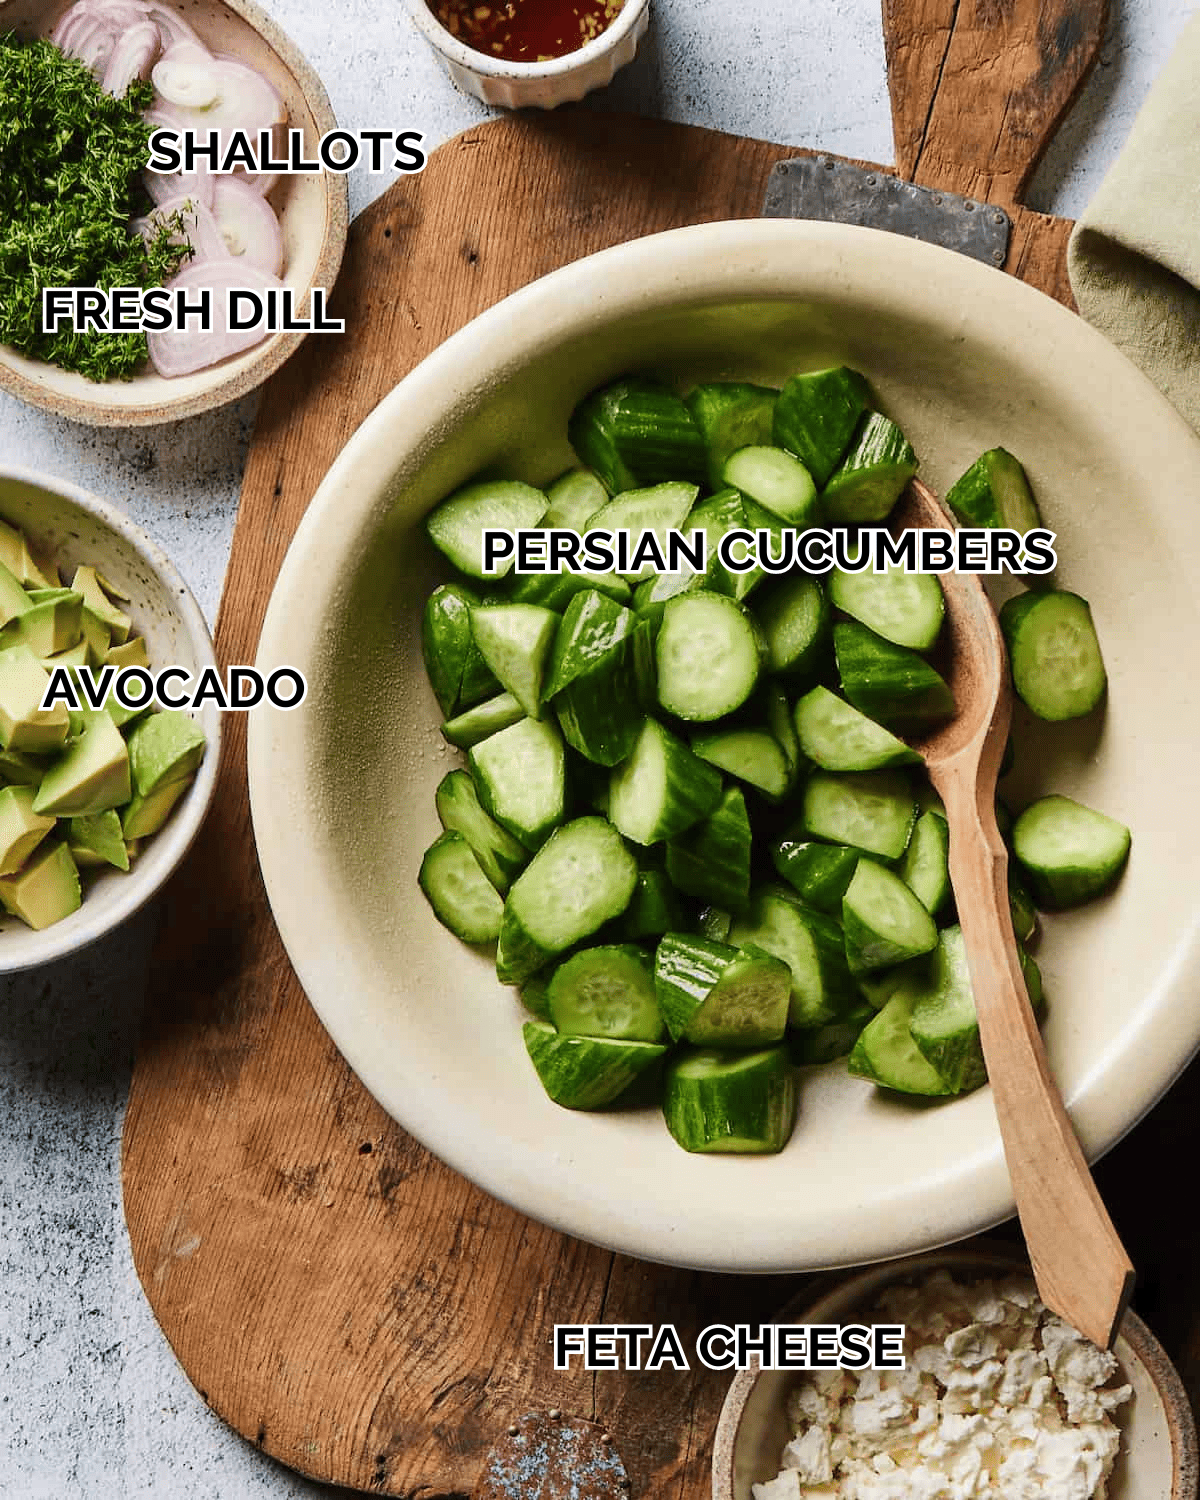 mise-en-place with all the ingredients required to make cucumber feta salad.